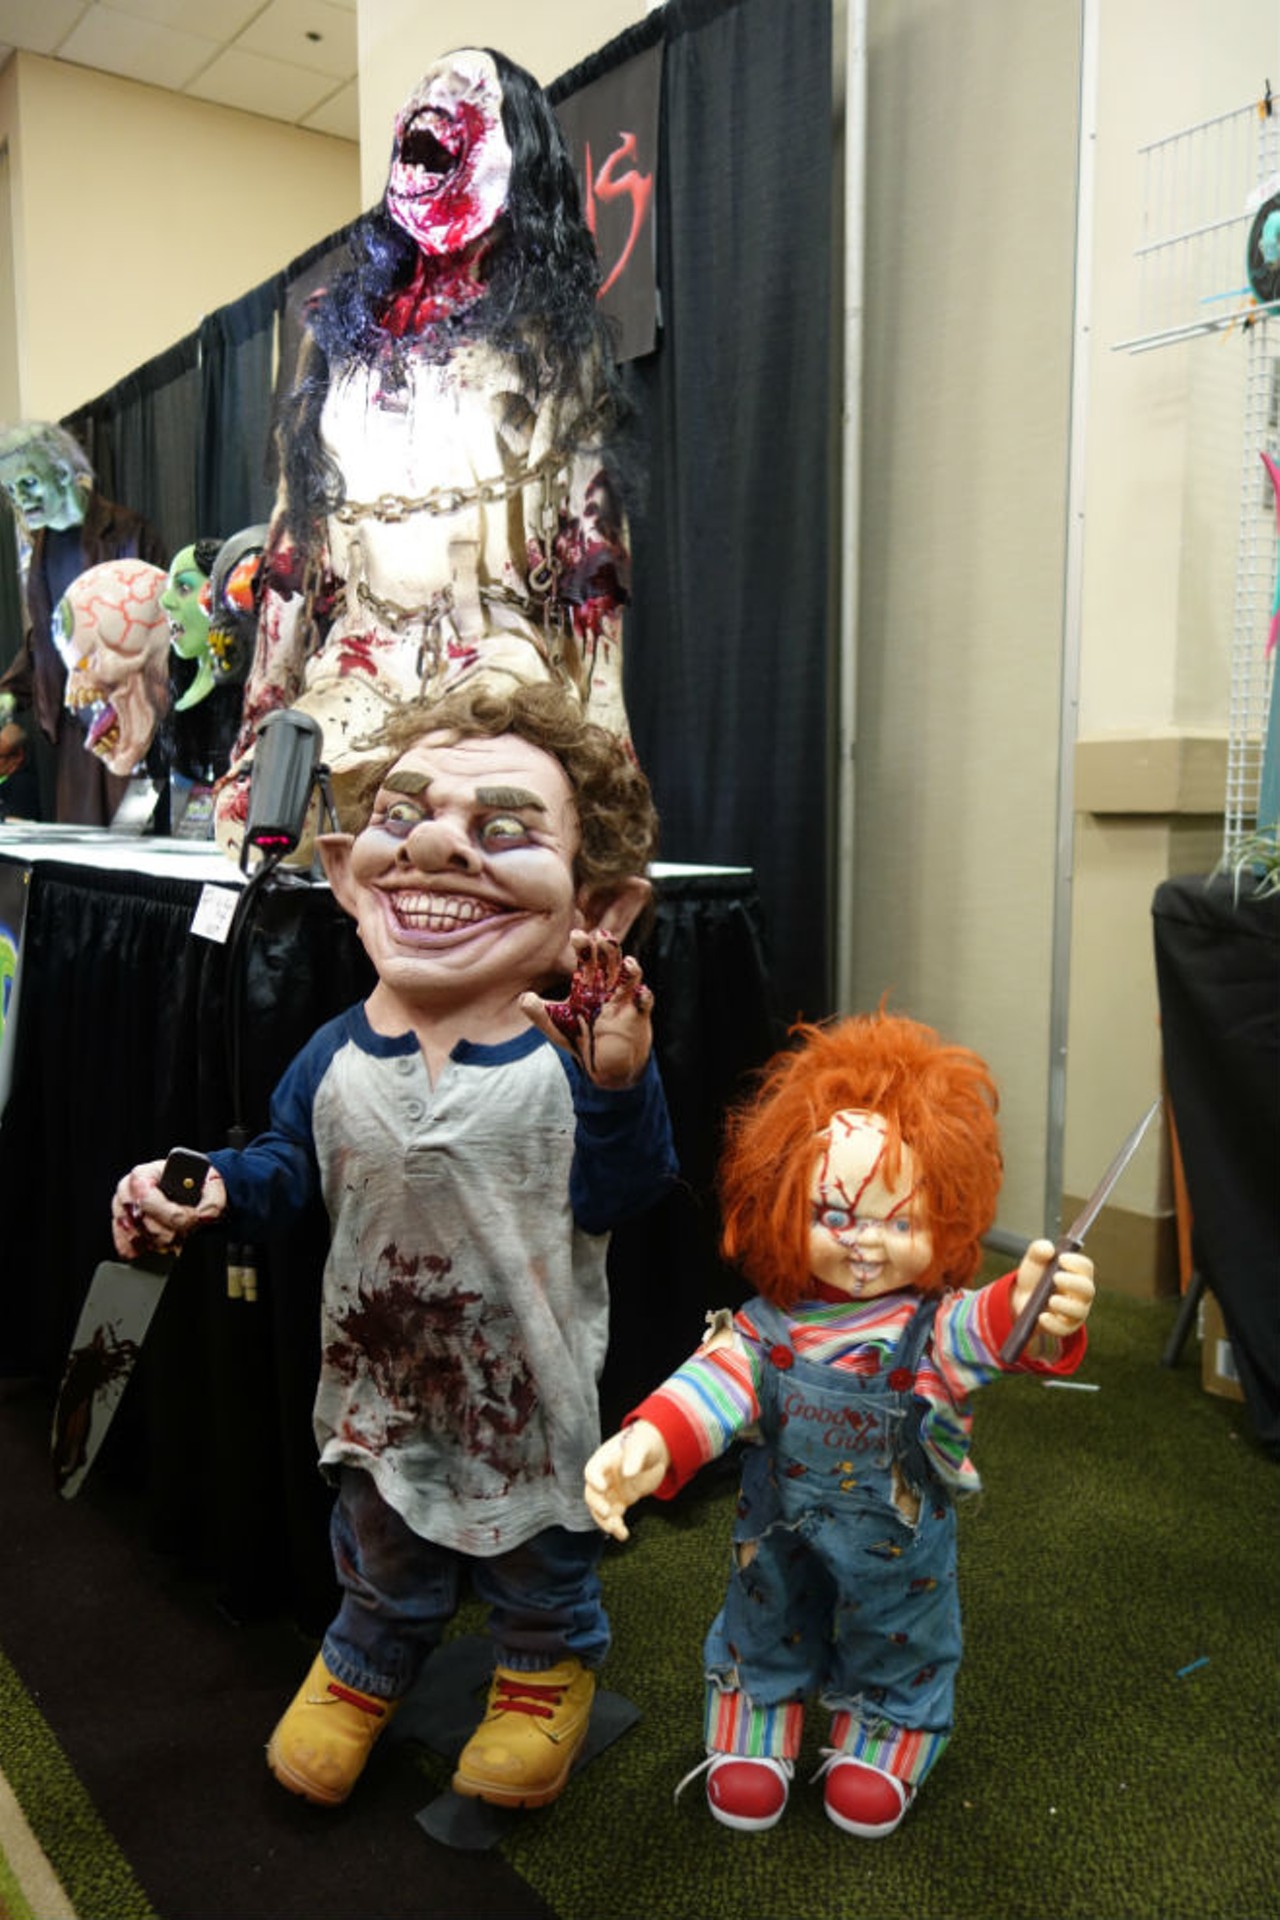 33 freaky photos from Spooky Empire! Plus, one photo of Tom Skerritt.